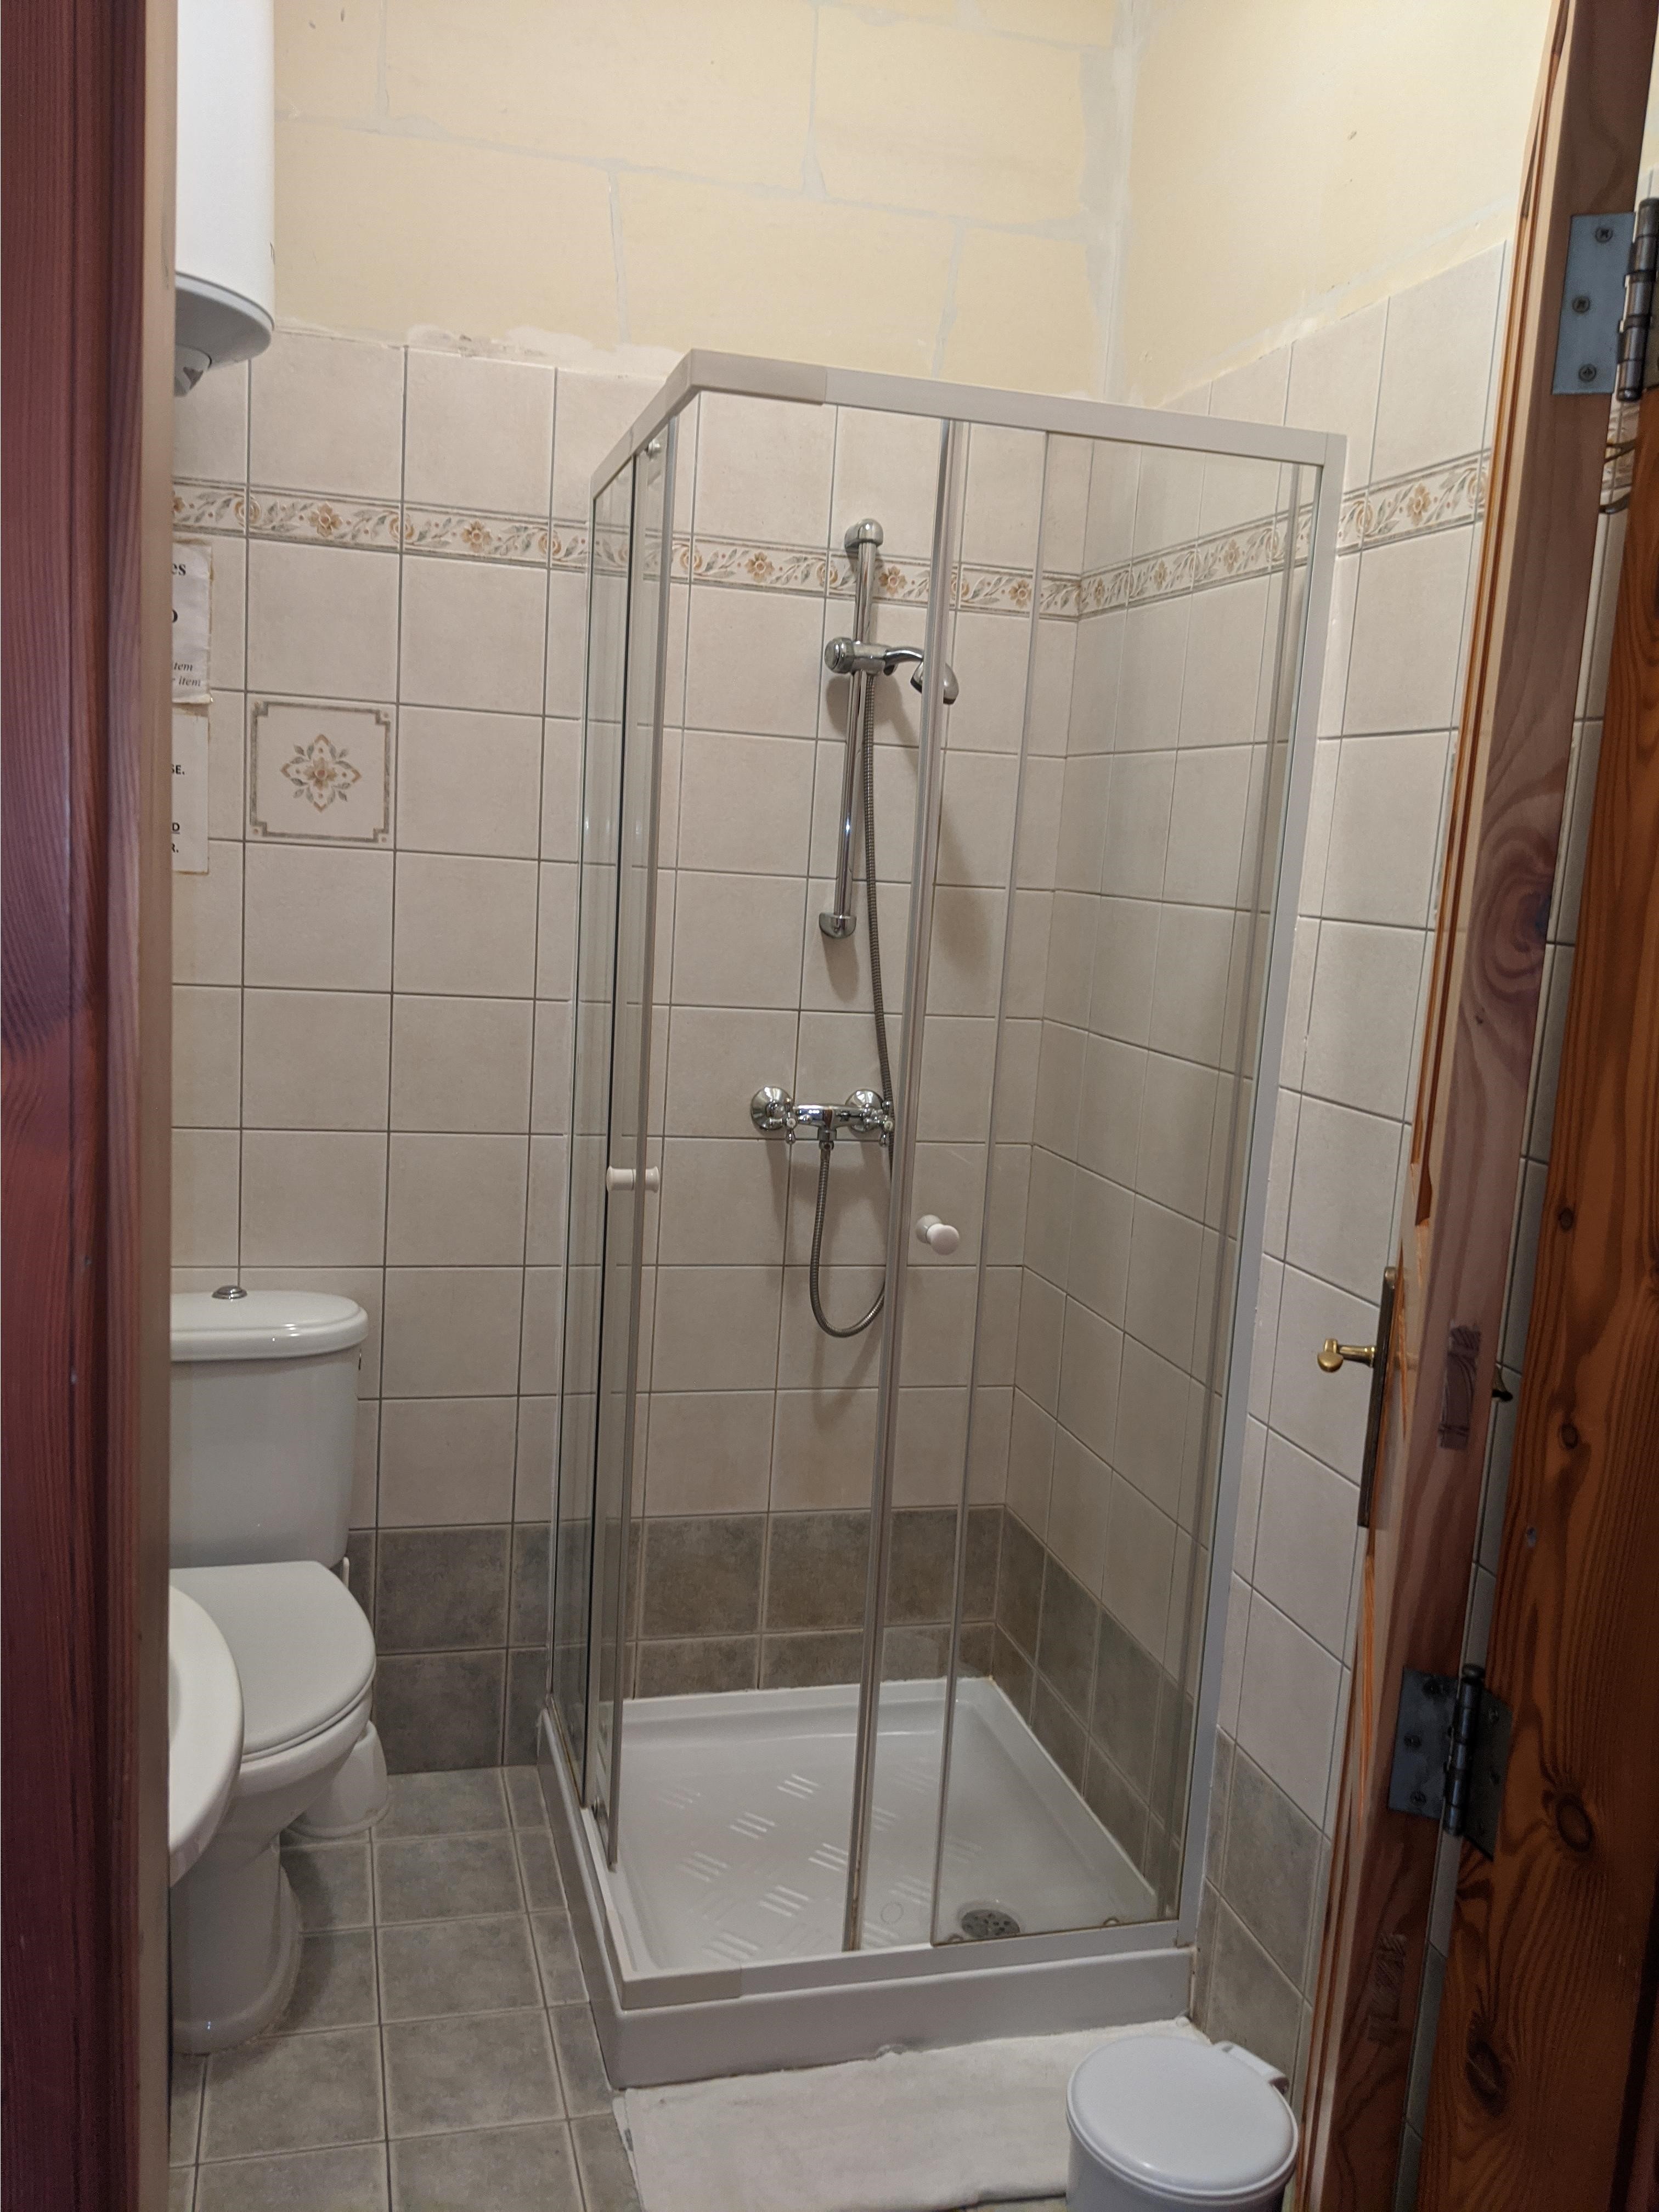 Study English in Malta - GSE Residence bathrooms cleaned every day